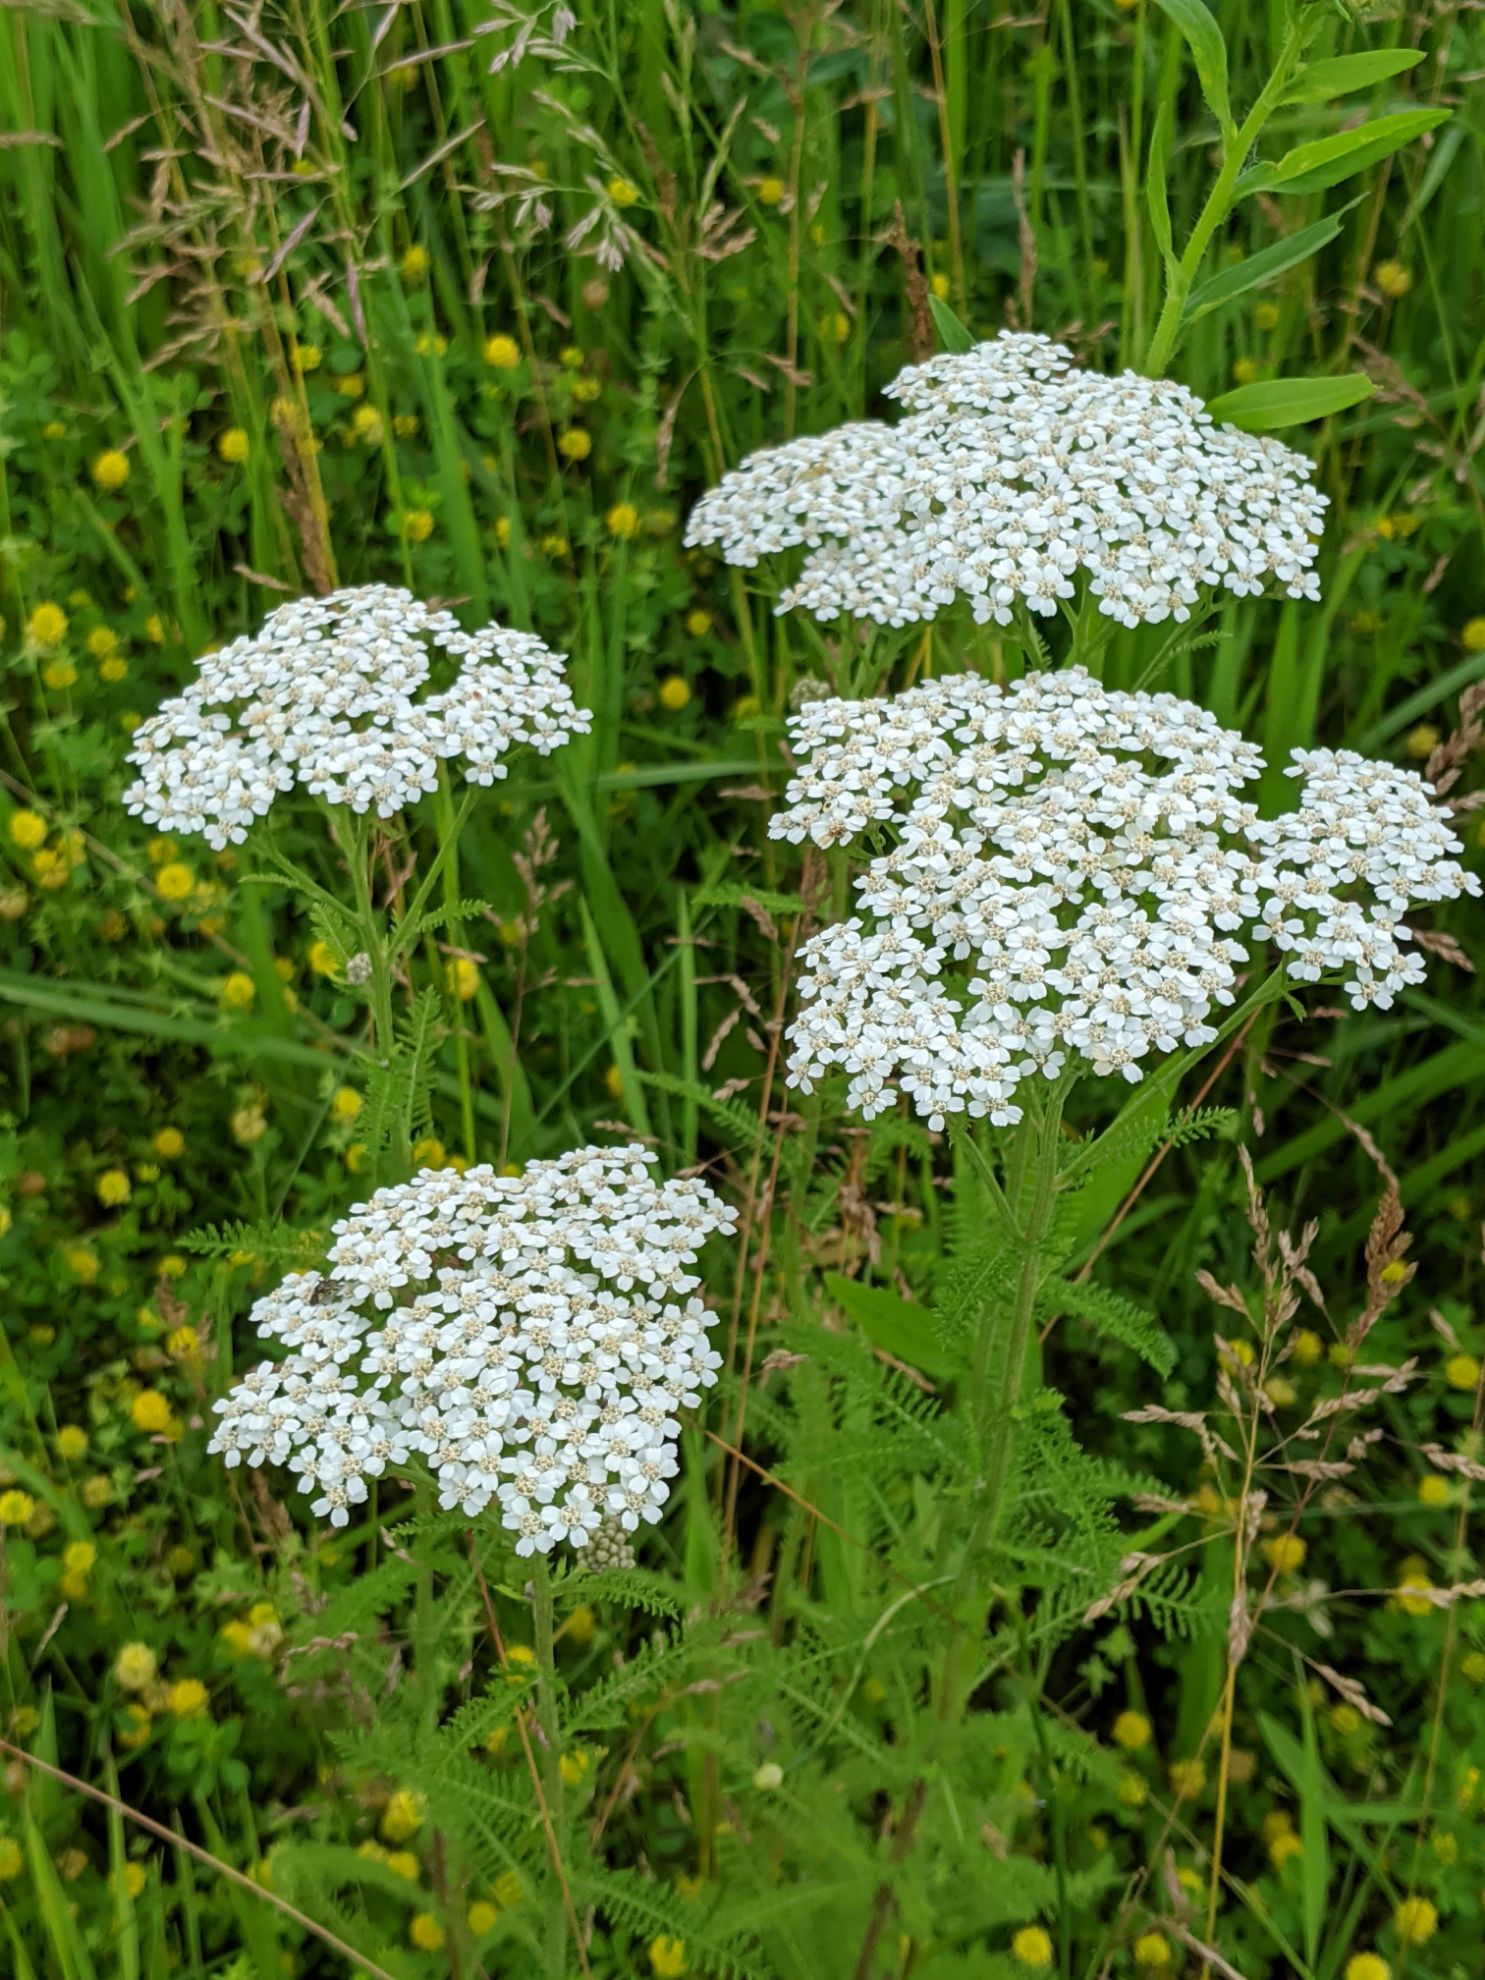 How to Grow and Care for Yarrow